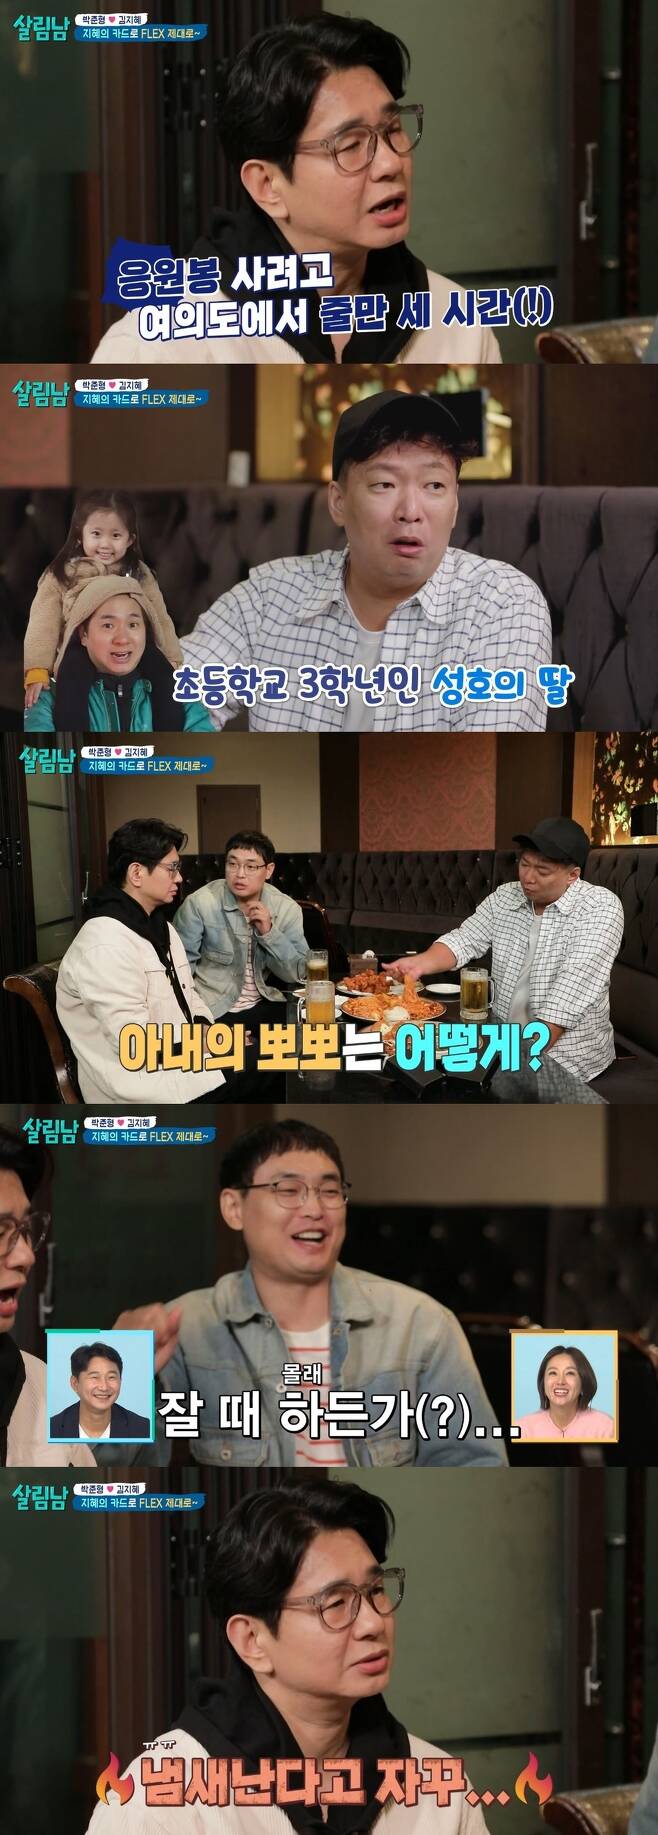 Dr. Cheng talked about his life as a breadwinner.On November 4th, KBS 2TV The Living Men Season 2 (hereinafter referred to as salim nam) revealed the daily life of Joon Park and Kim Ji Hye.On this day, Joon Park met comedian colleagues Dr. Cheng, Young Jin Park. When I asked Mr. Cheng how he was doing, he said, I live most busily.He surprised everyone by saying that he had lined up for three hours in Yeouido for his daughter who liked Ives.When Young Jin Park asked, What about your wife? Cheng said, Do it secretly when youre sleeping, or dont do it. These days, I keep getting a kiss.Lee Chun-soo of the studio said, When I get older, I see Smell.Kim Ji Hye said, Joon Park is also getting older, so wash hard behind your ears.In response to Chengs lament, Joon Park said, If you are 11 years older, Smell may be different. Is your wife coming? When Cheng was absent, Joon Park said, I envy you.Kim Ji Hye does not keep social distance. She loves me so much. However, Dr. Cheng and Young Jin Park added, Is not it because of the gap between rich and poor in the family? Is not it a slave relationship? If you do not do that, you will be kicked out.